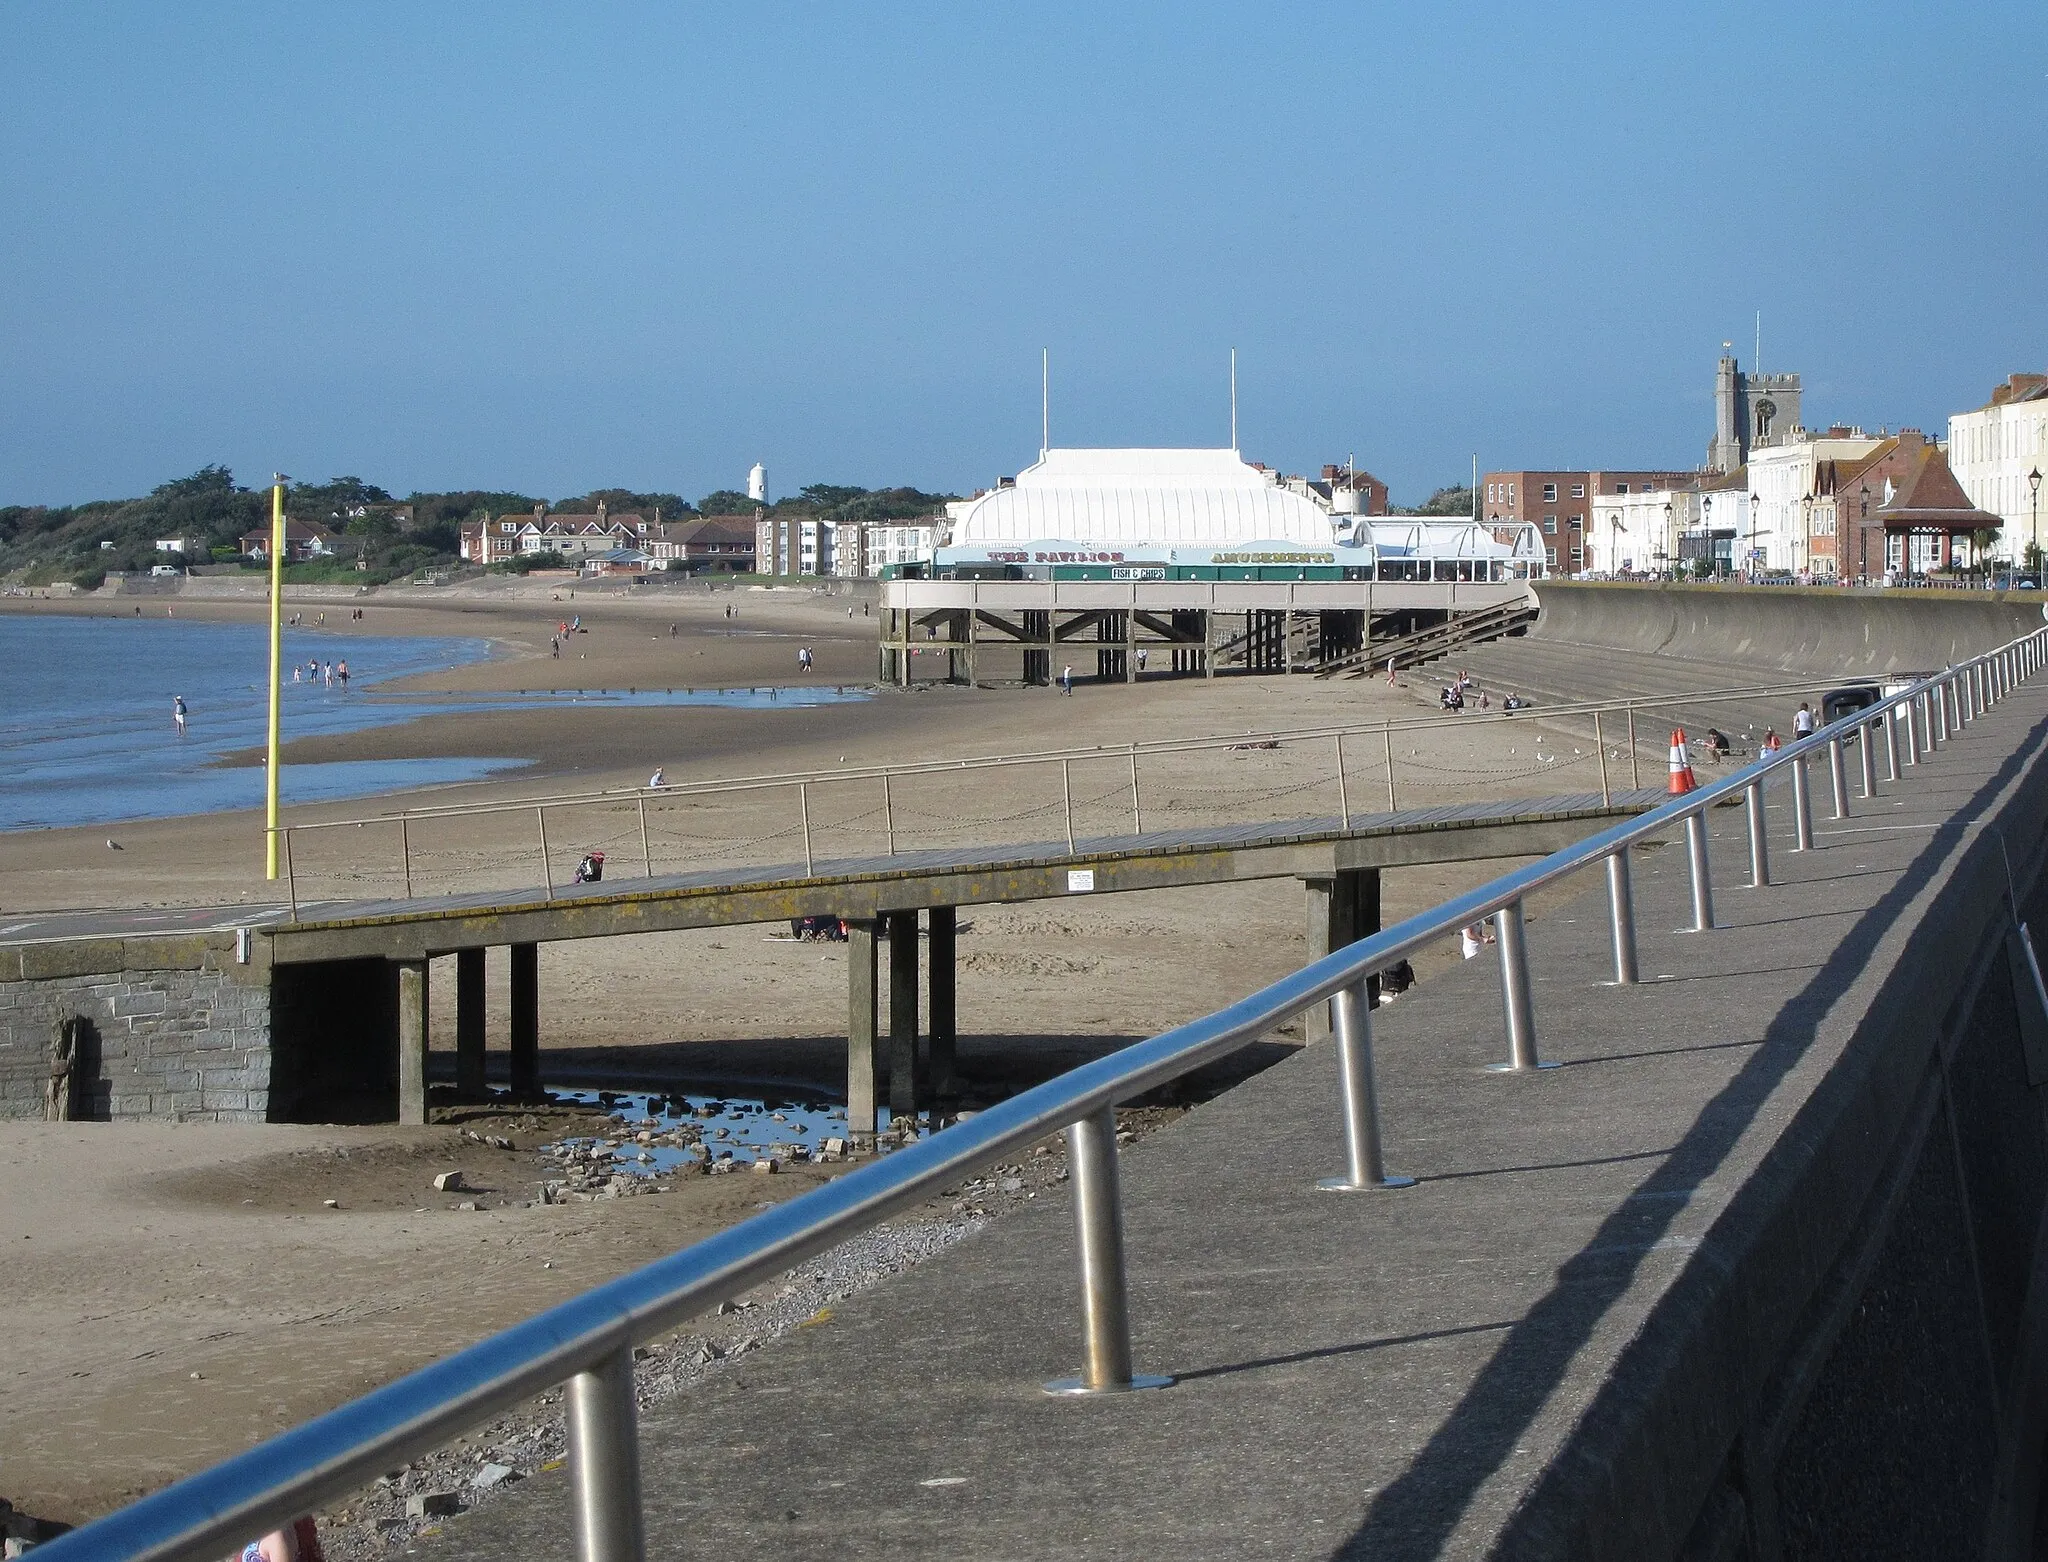 Photo showing: Burnham-on-Sea, Somerset, England. The beach and pier in 2016.